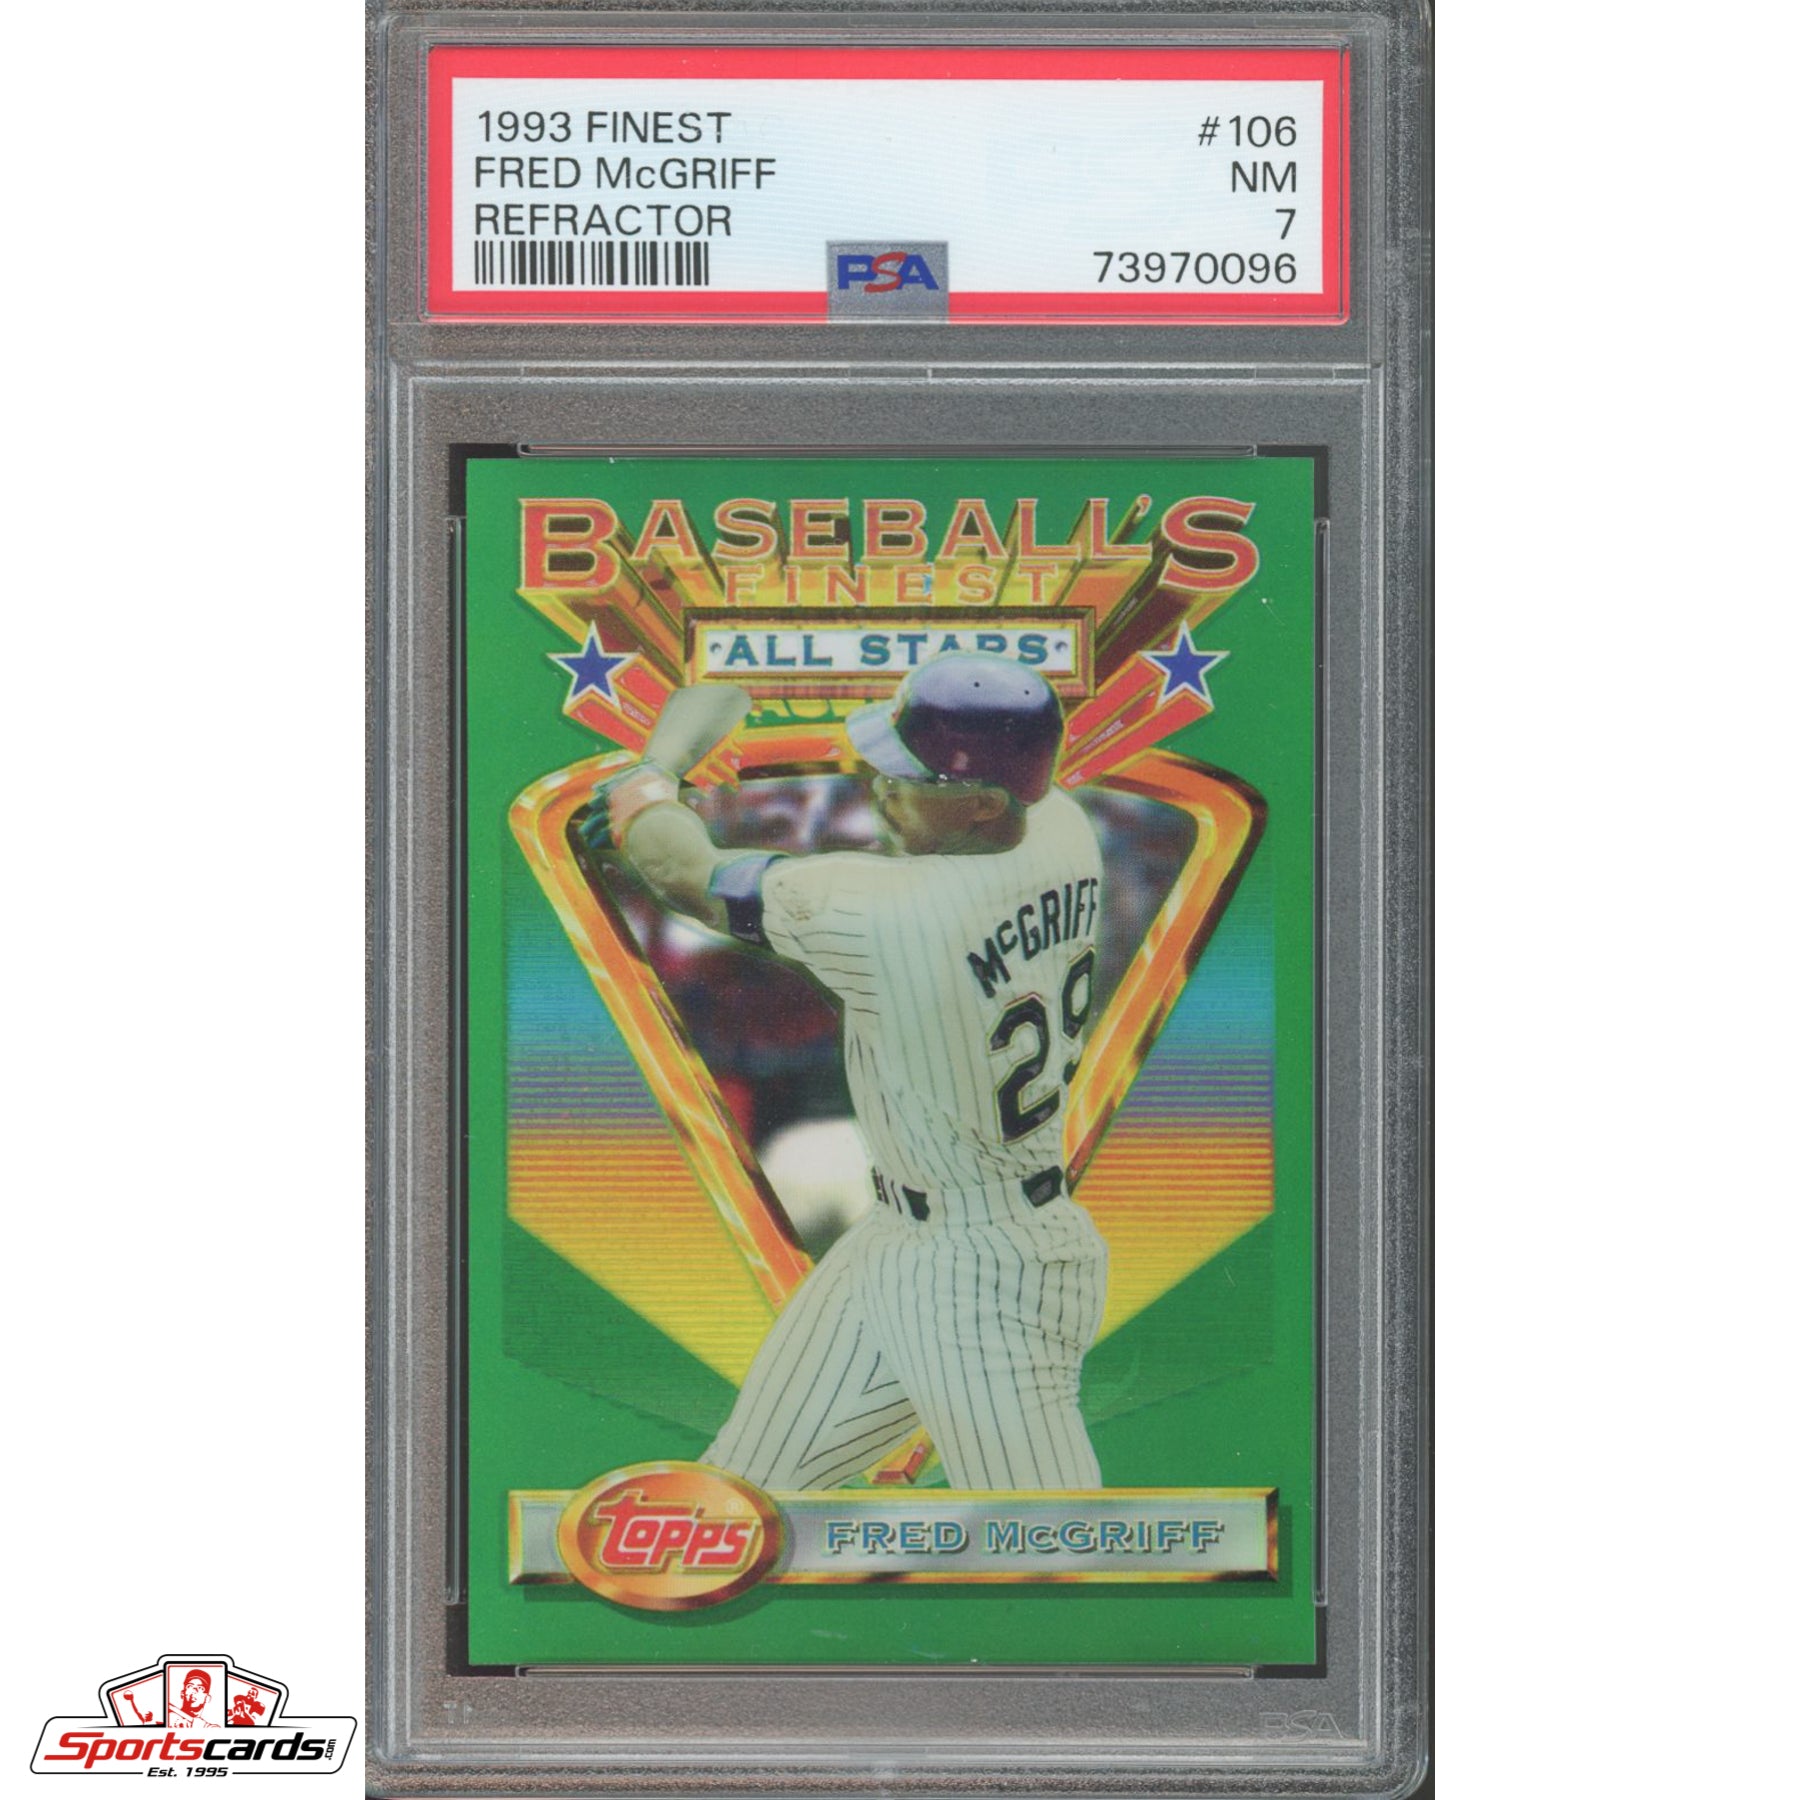 1993 Finest Fred McGriff Refractor #106 PSA 7